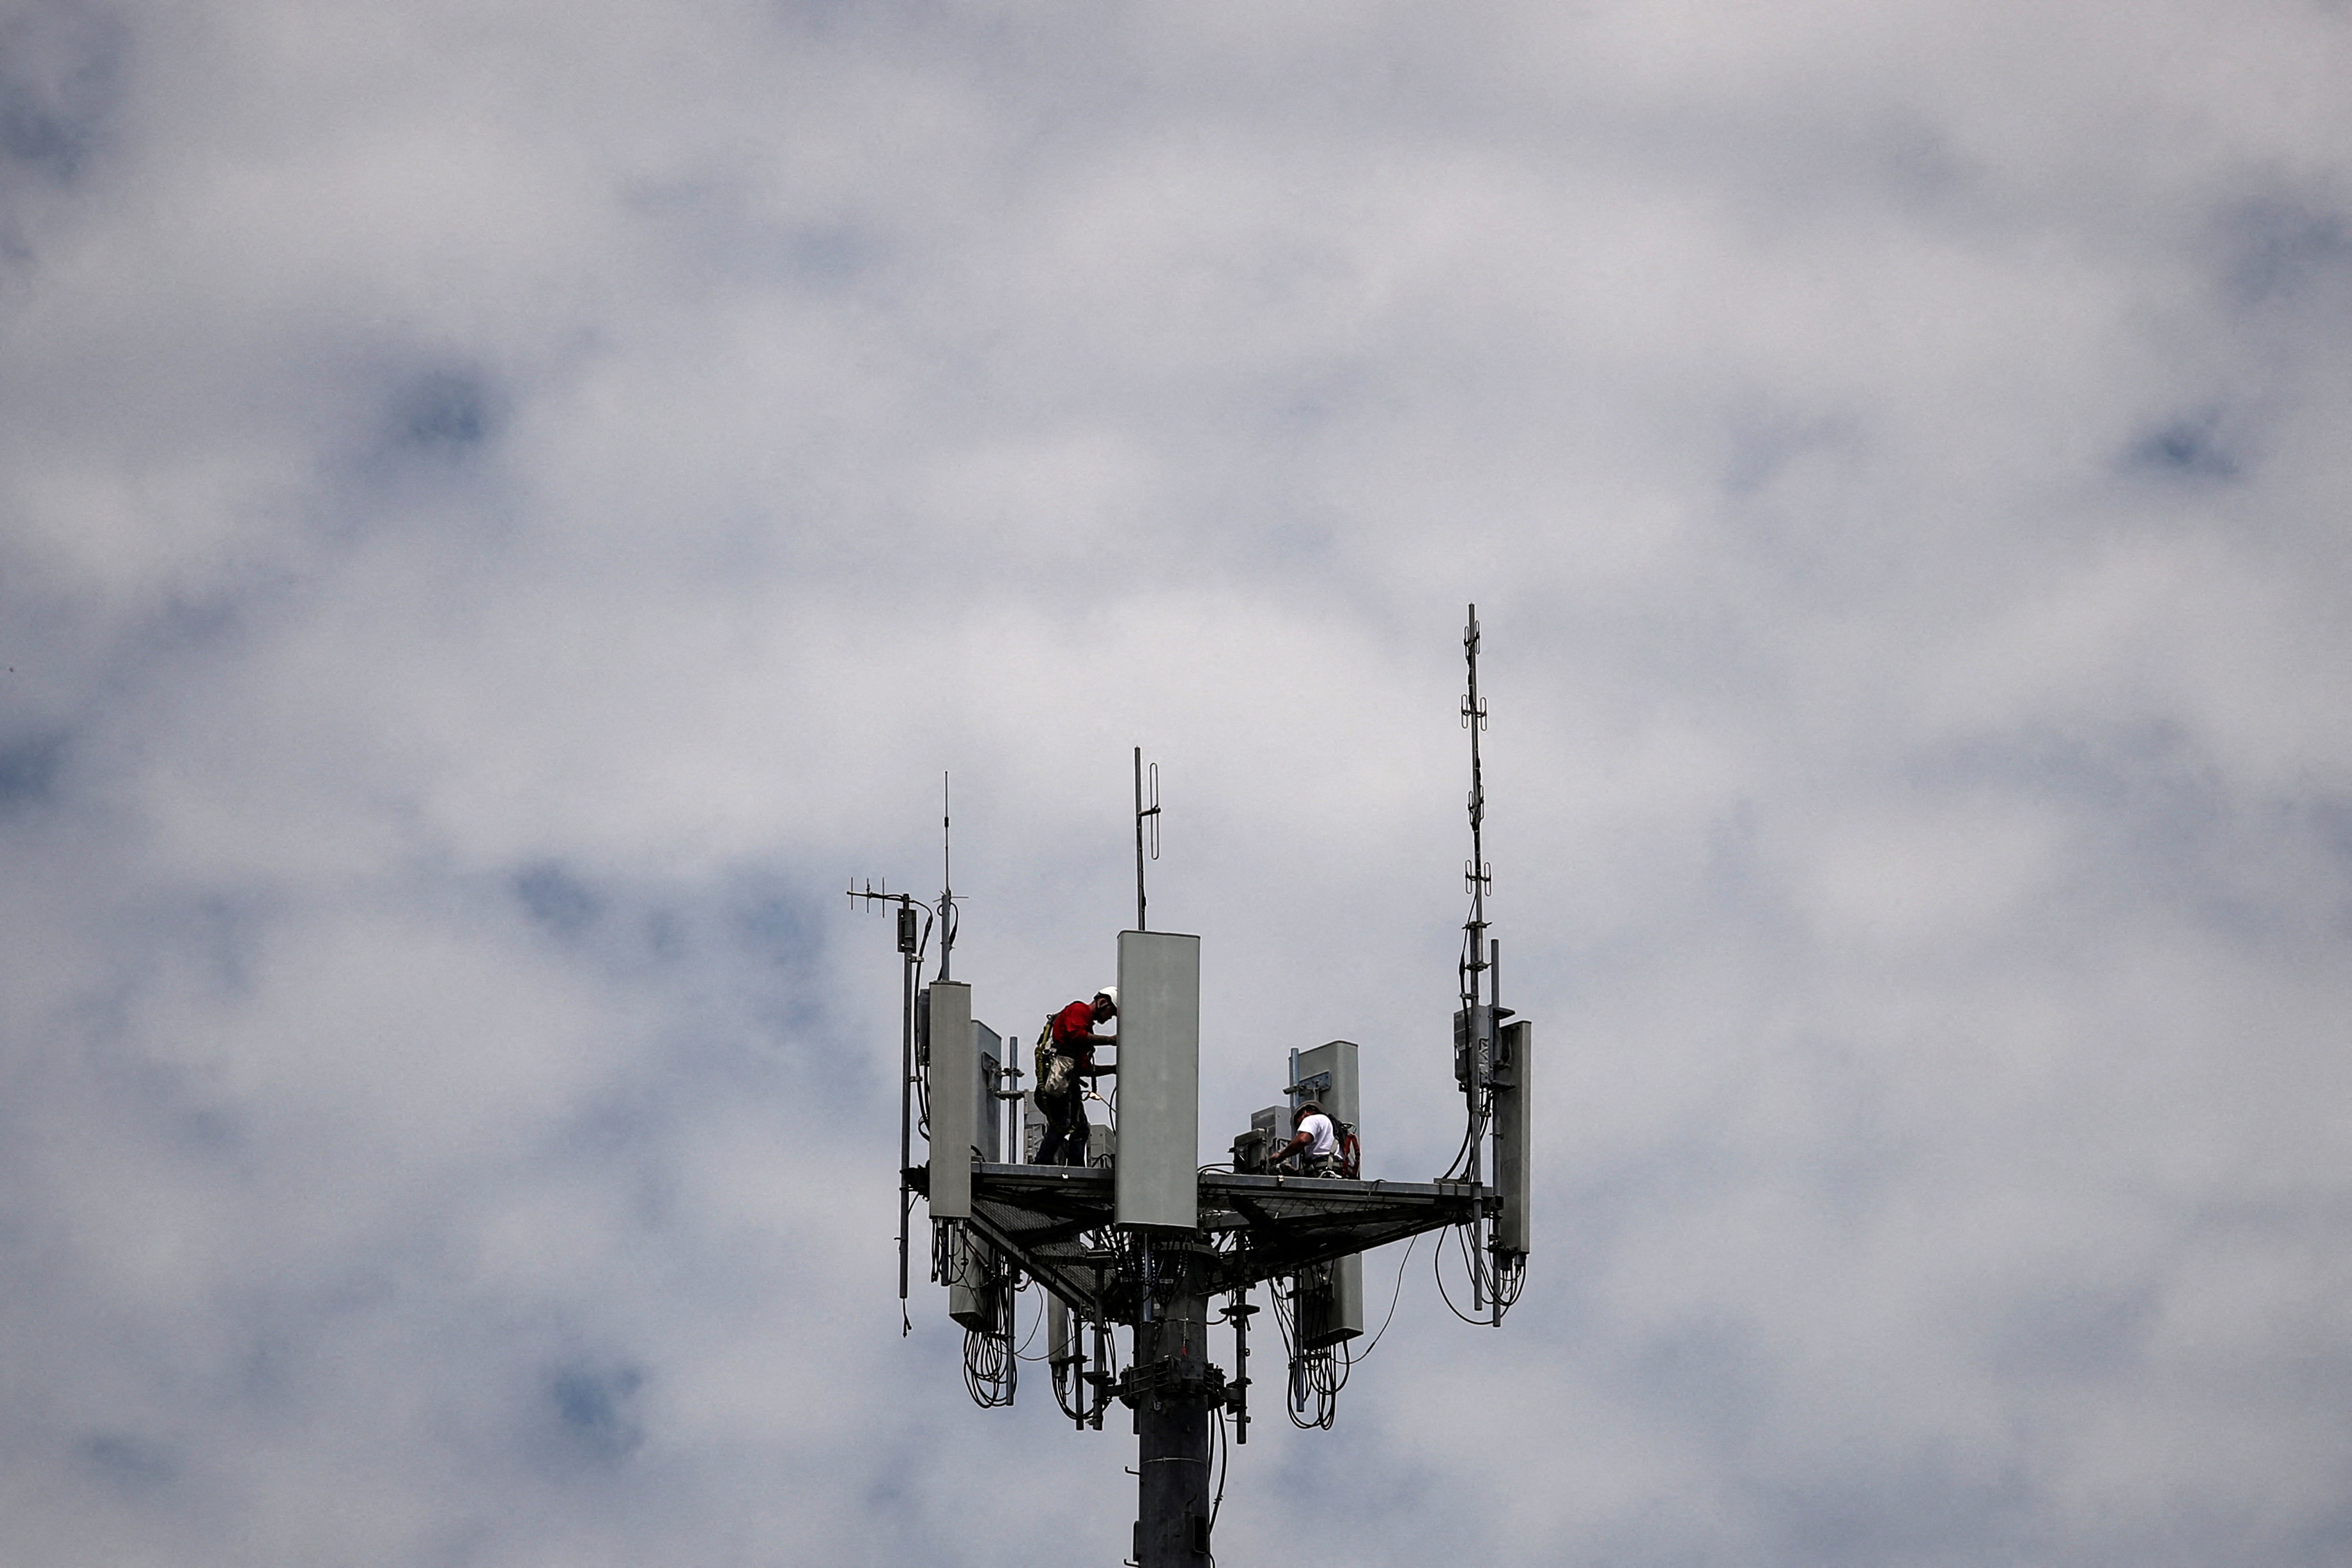 Workers install 5G telecommunications equipment on a T-Mobile tower in Seabrook, Texas